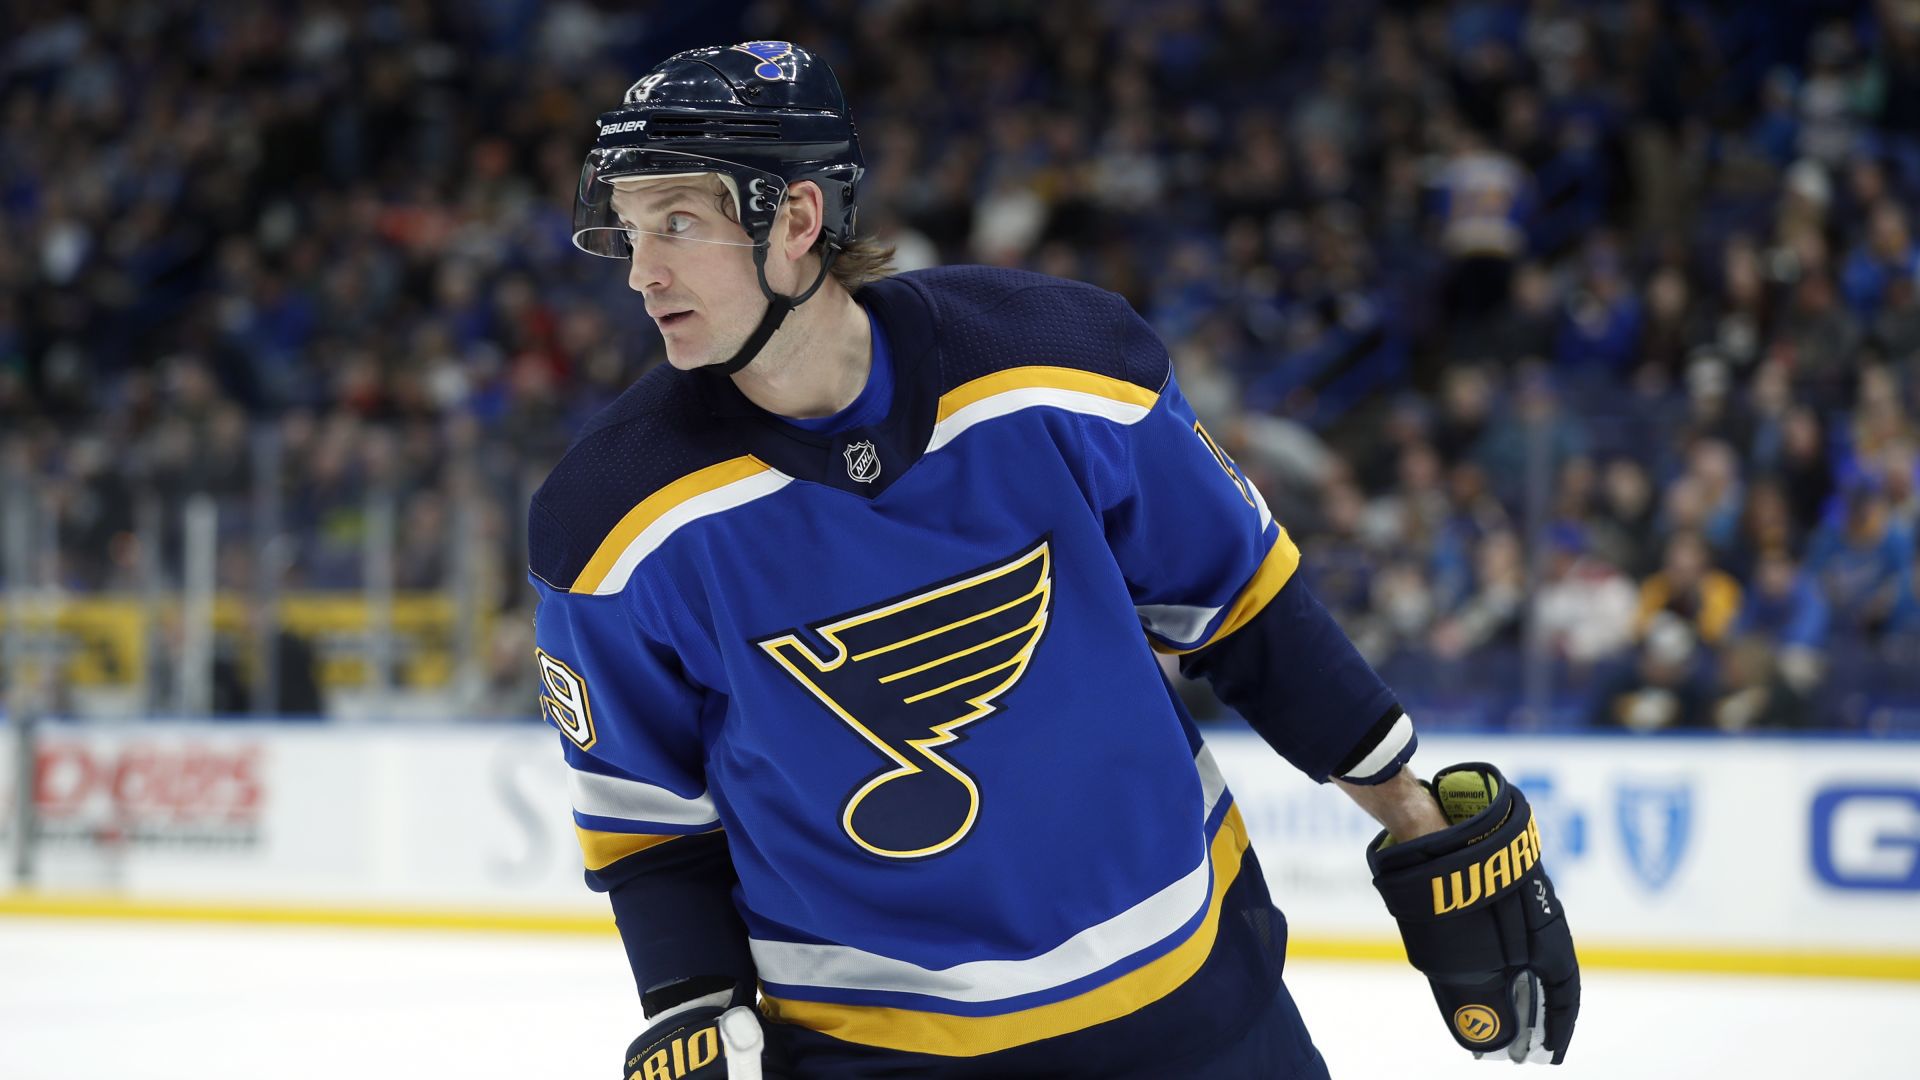 Bouwmeester a healthy scratch for first 